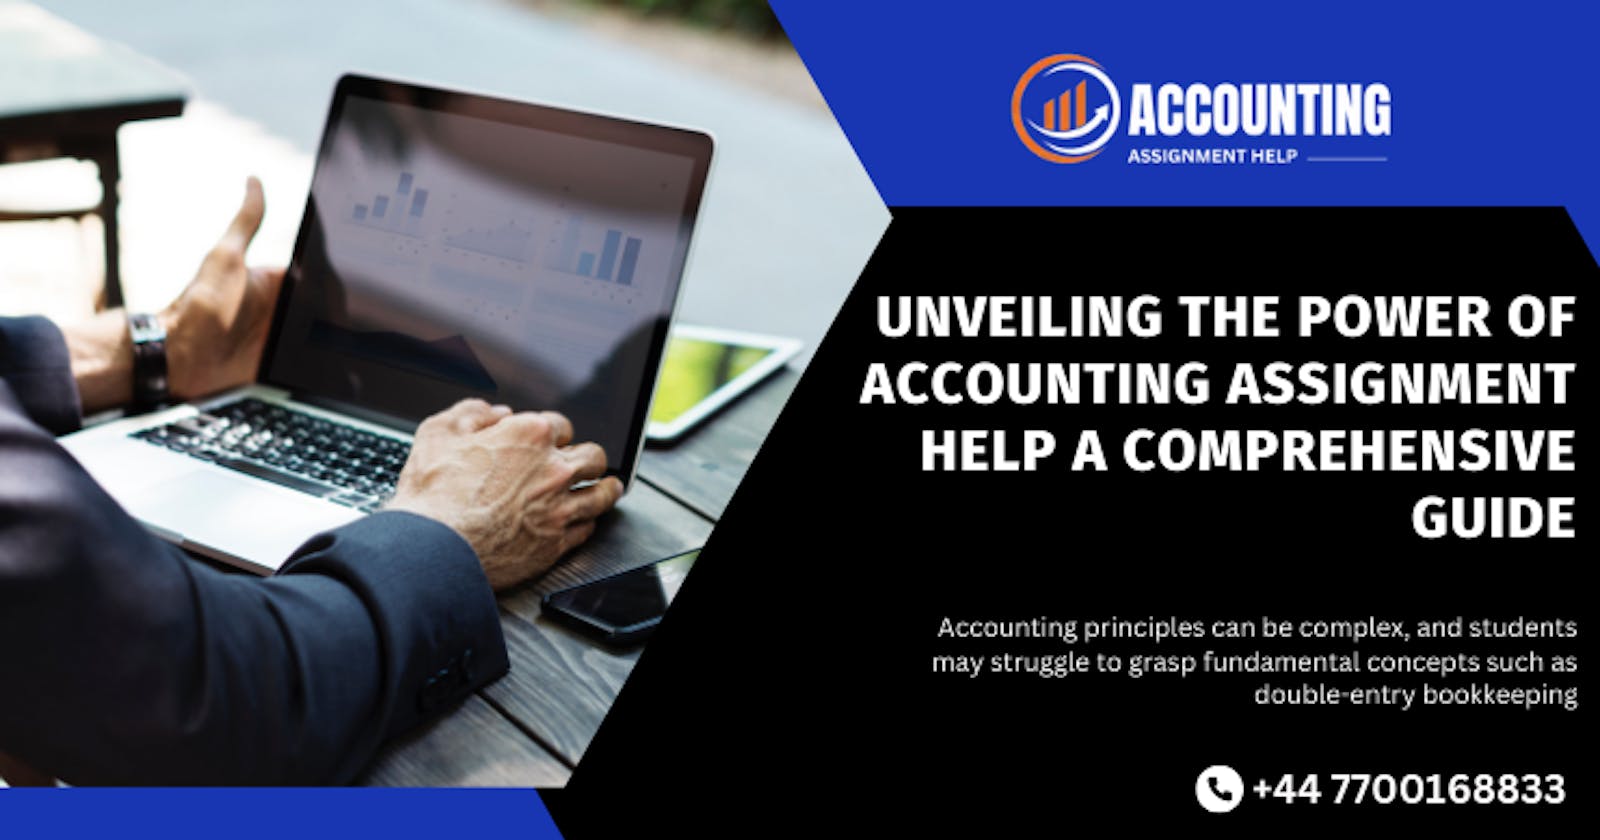 Accounting principles can be complex, and students may struggle to grasp fundamental concepts such as double-entry bookkeeping